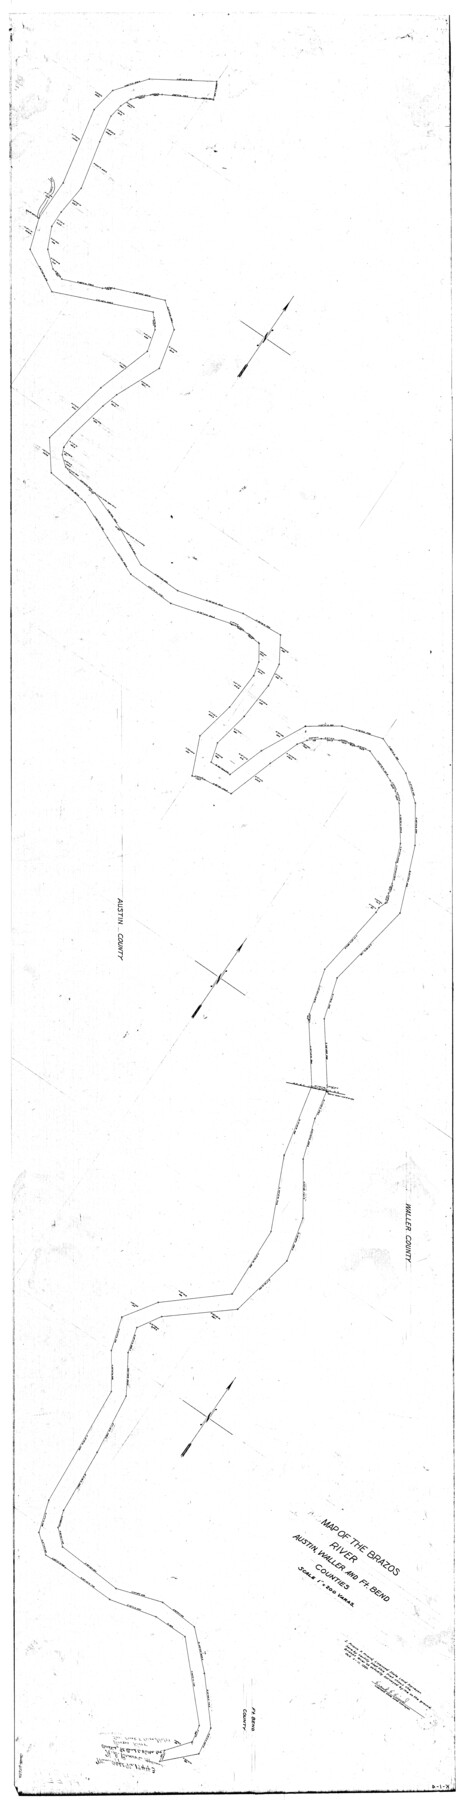 65682, [Sketch for Mineral Application 19443 - Brazos River], General Map Collection